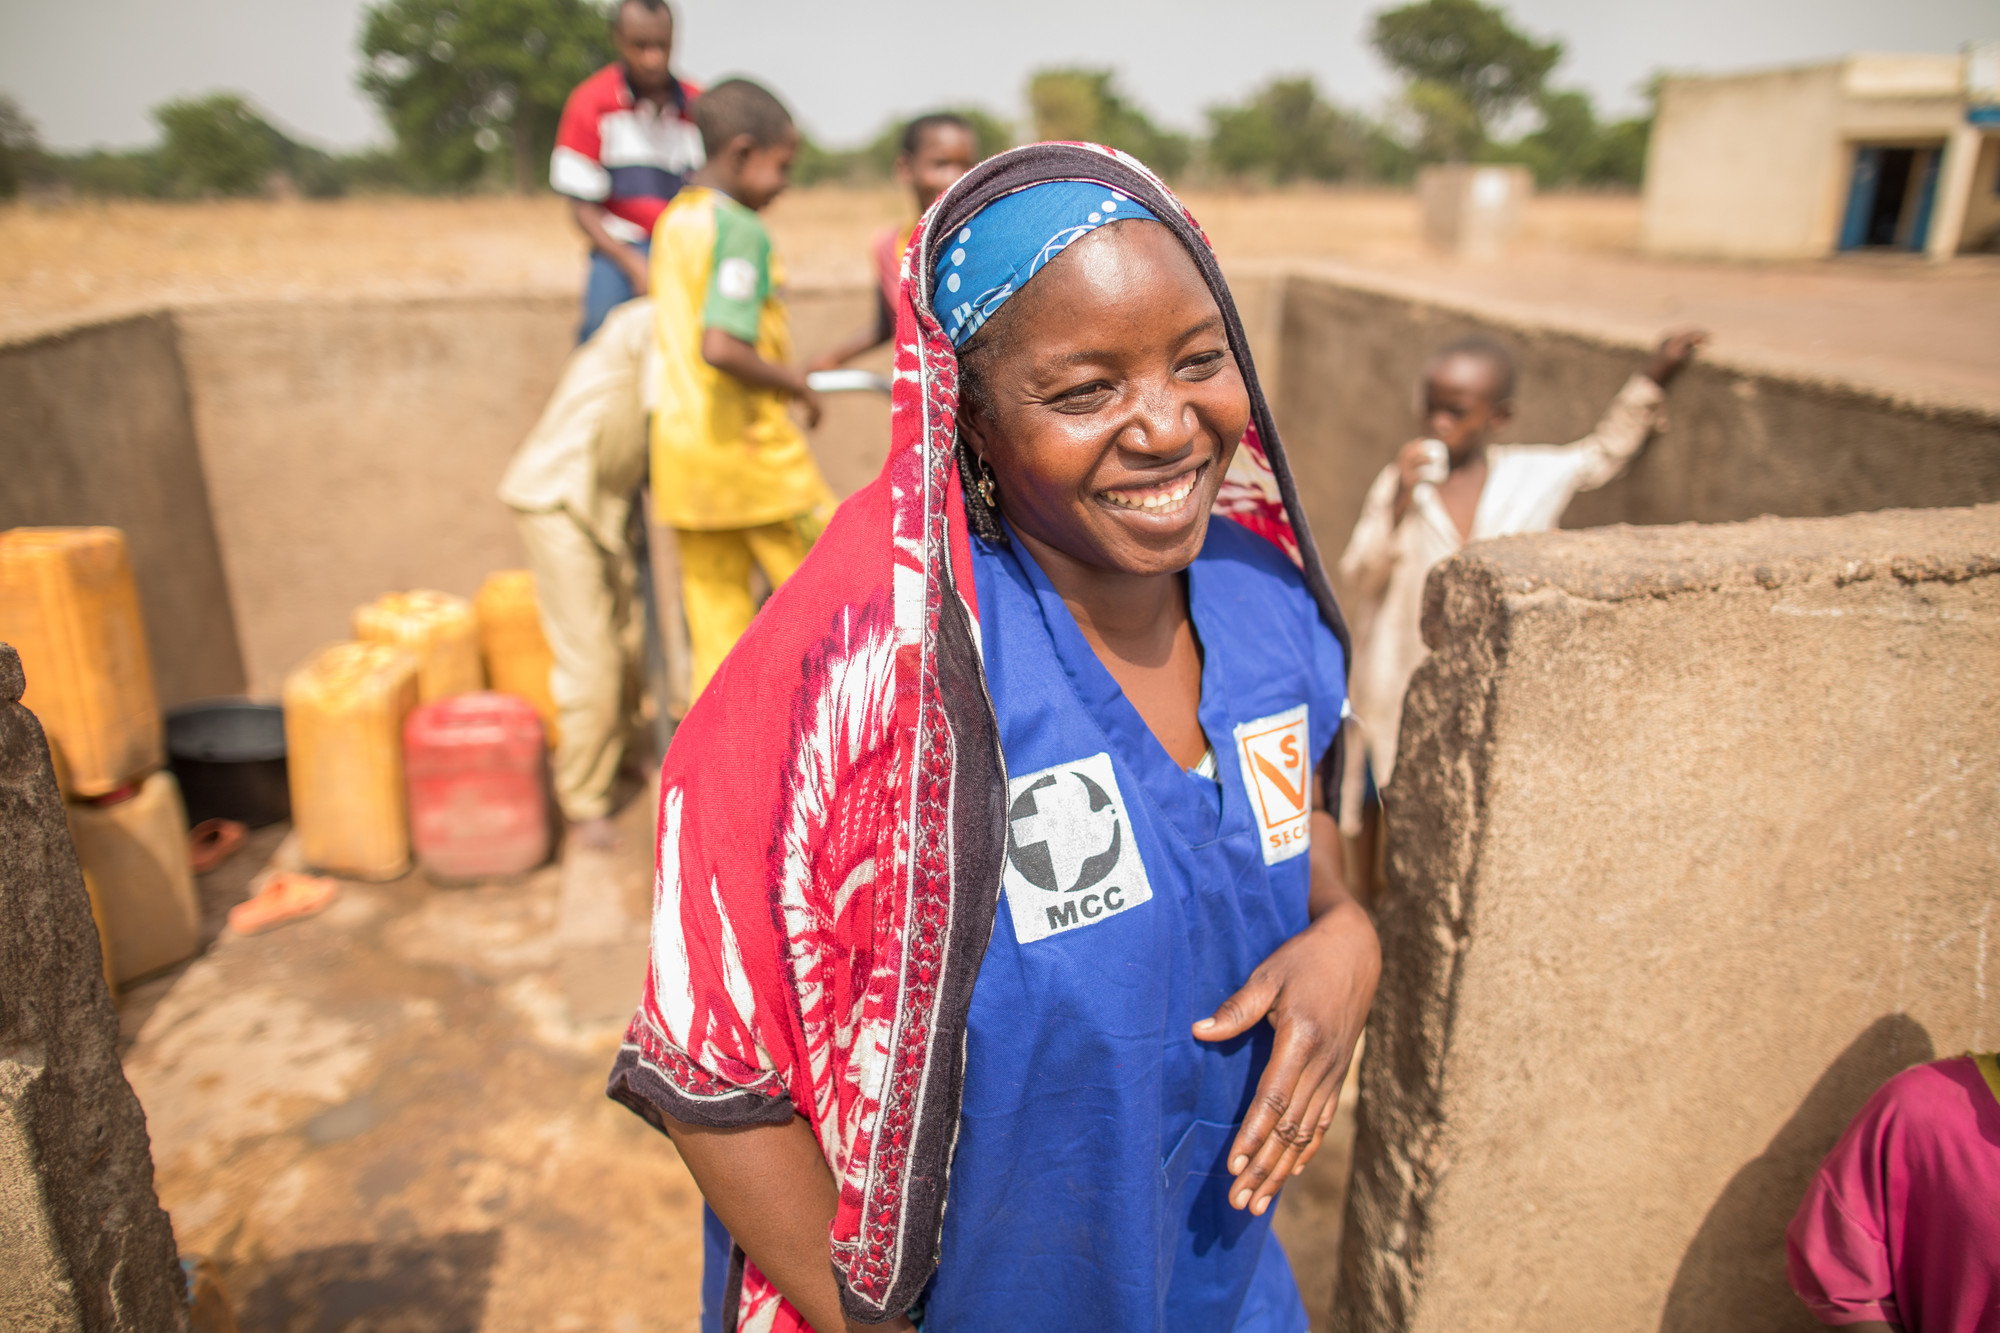 A Chadian woman in a blue shirt and red scarf covering her read laughs near a well.